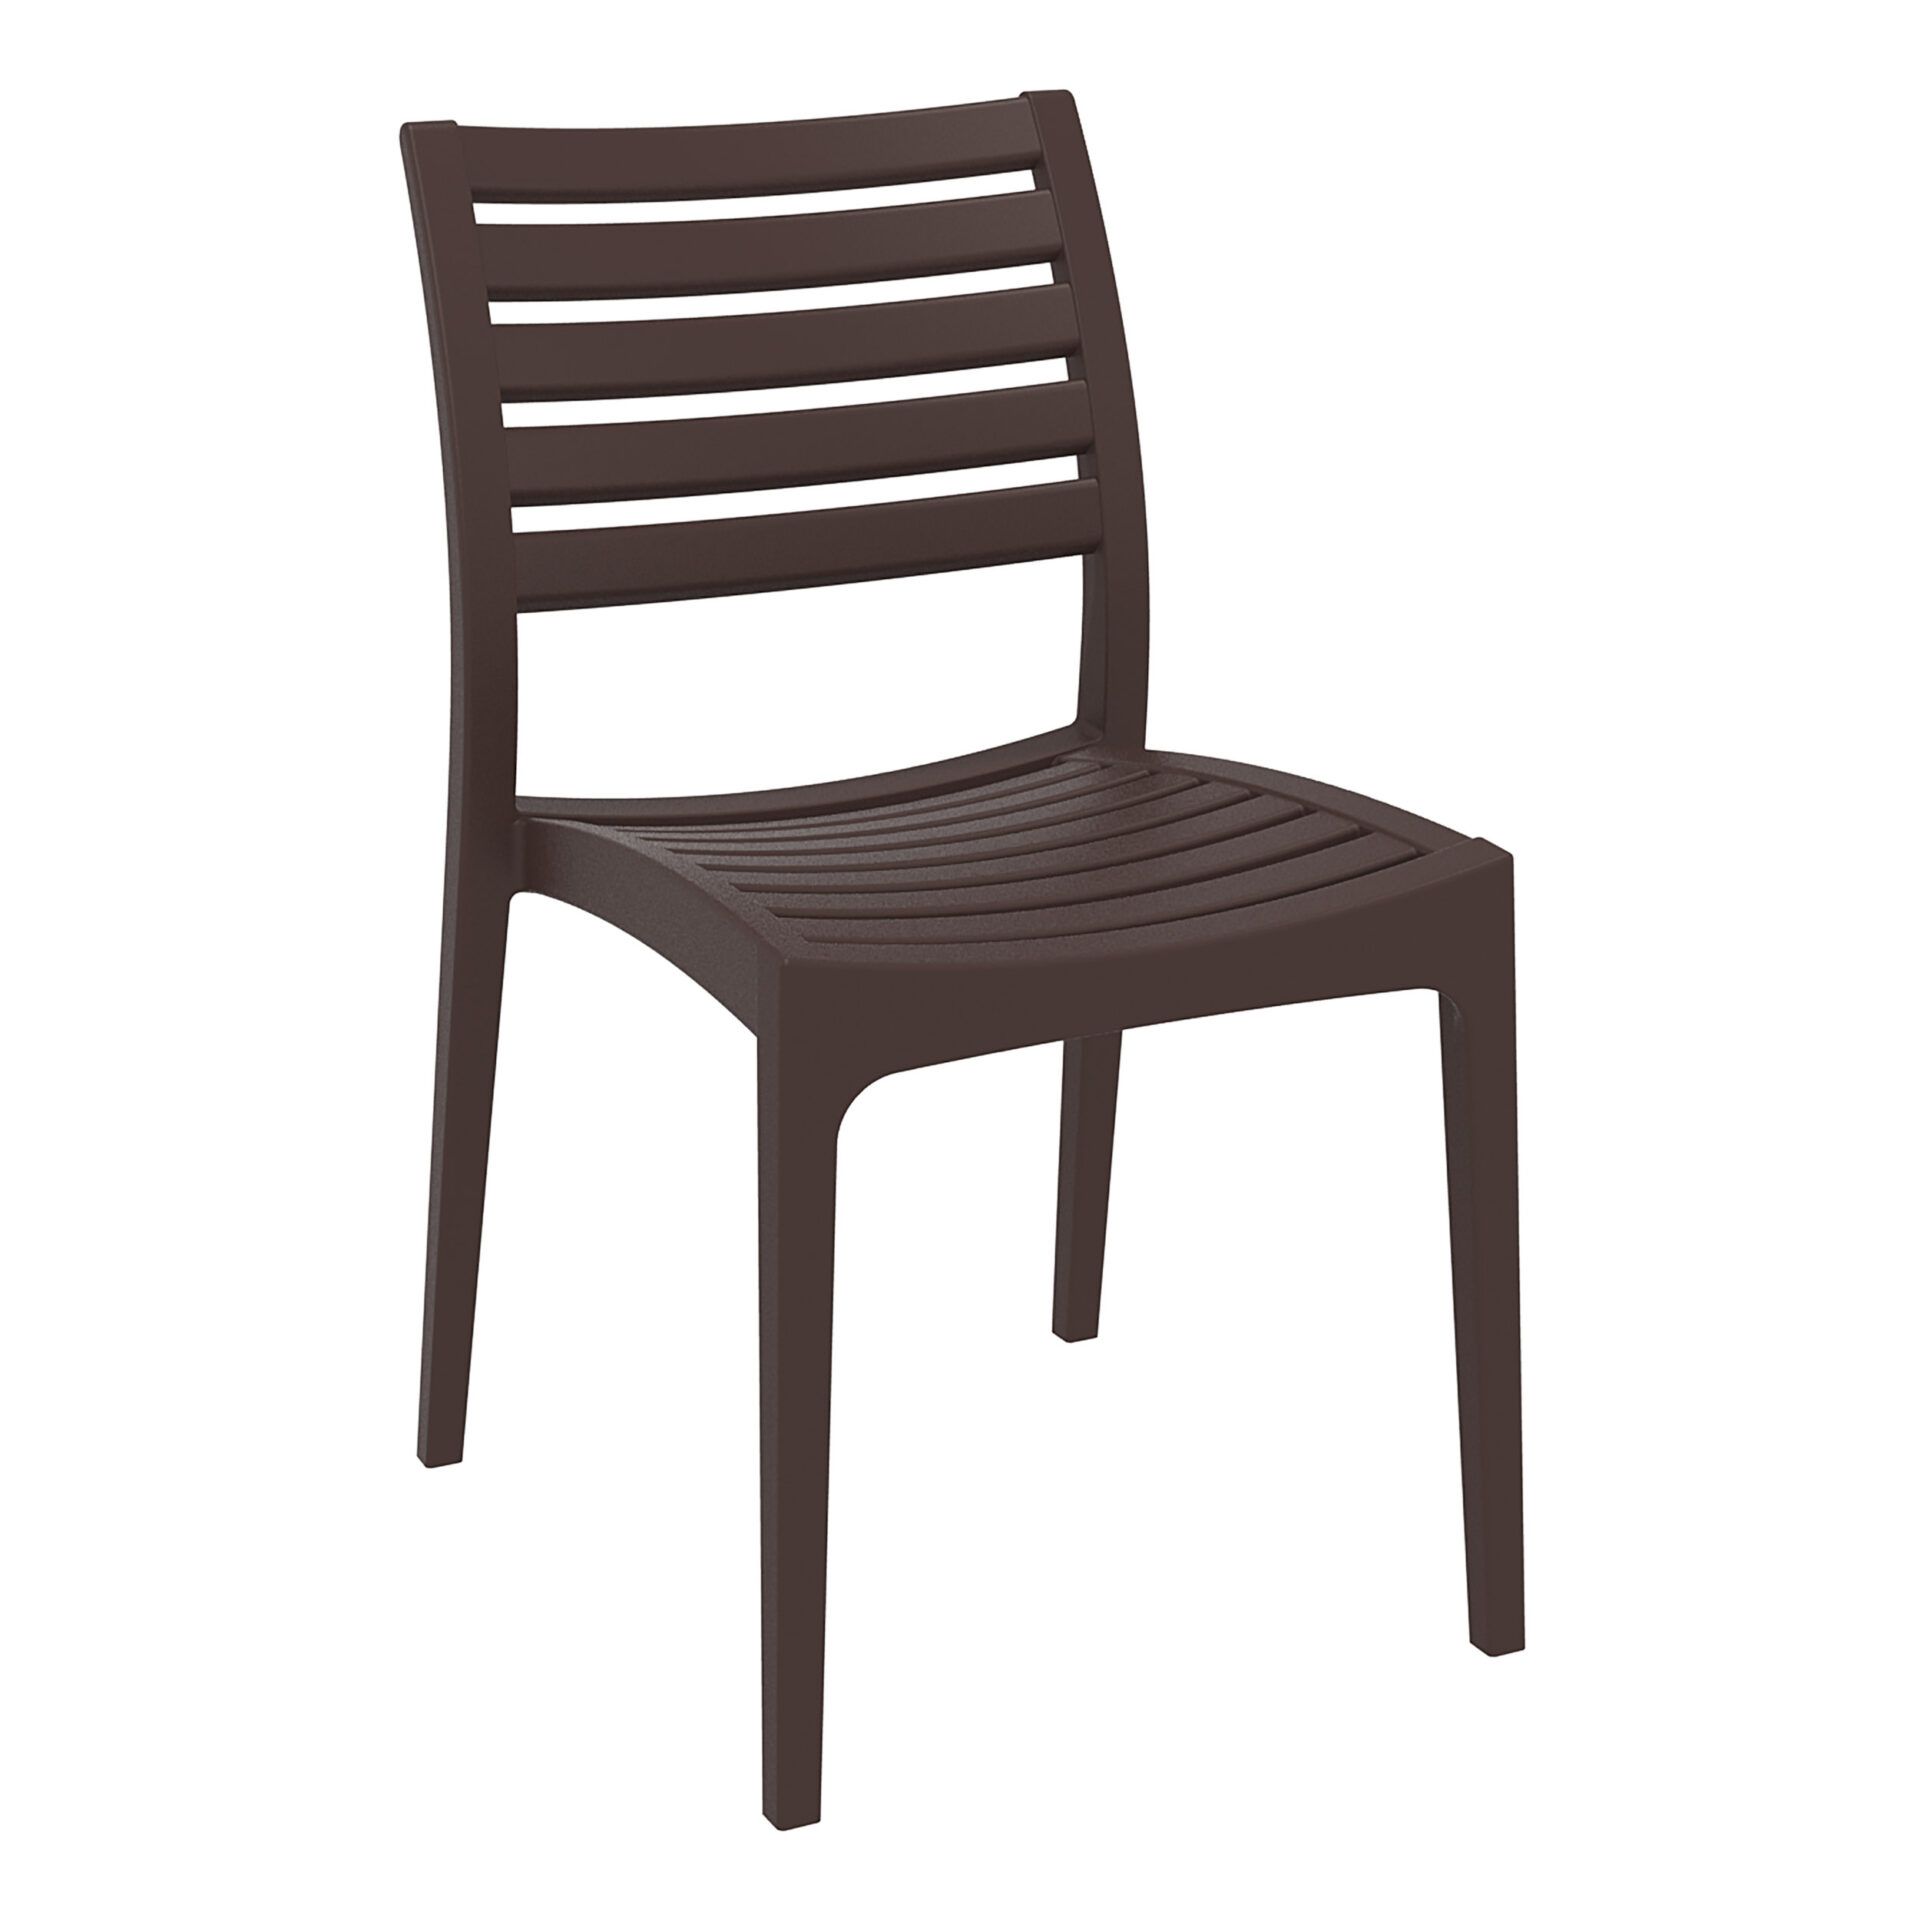 outdoor ares chair brown front side